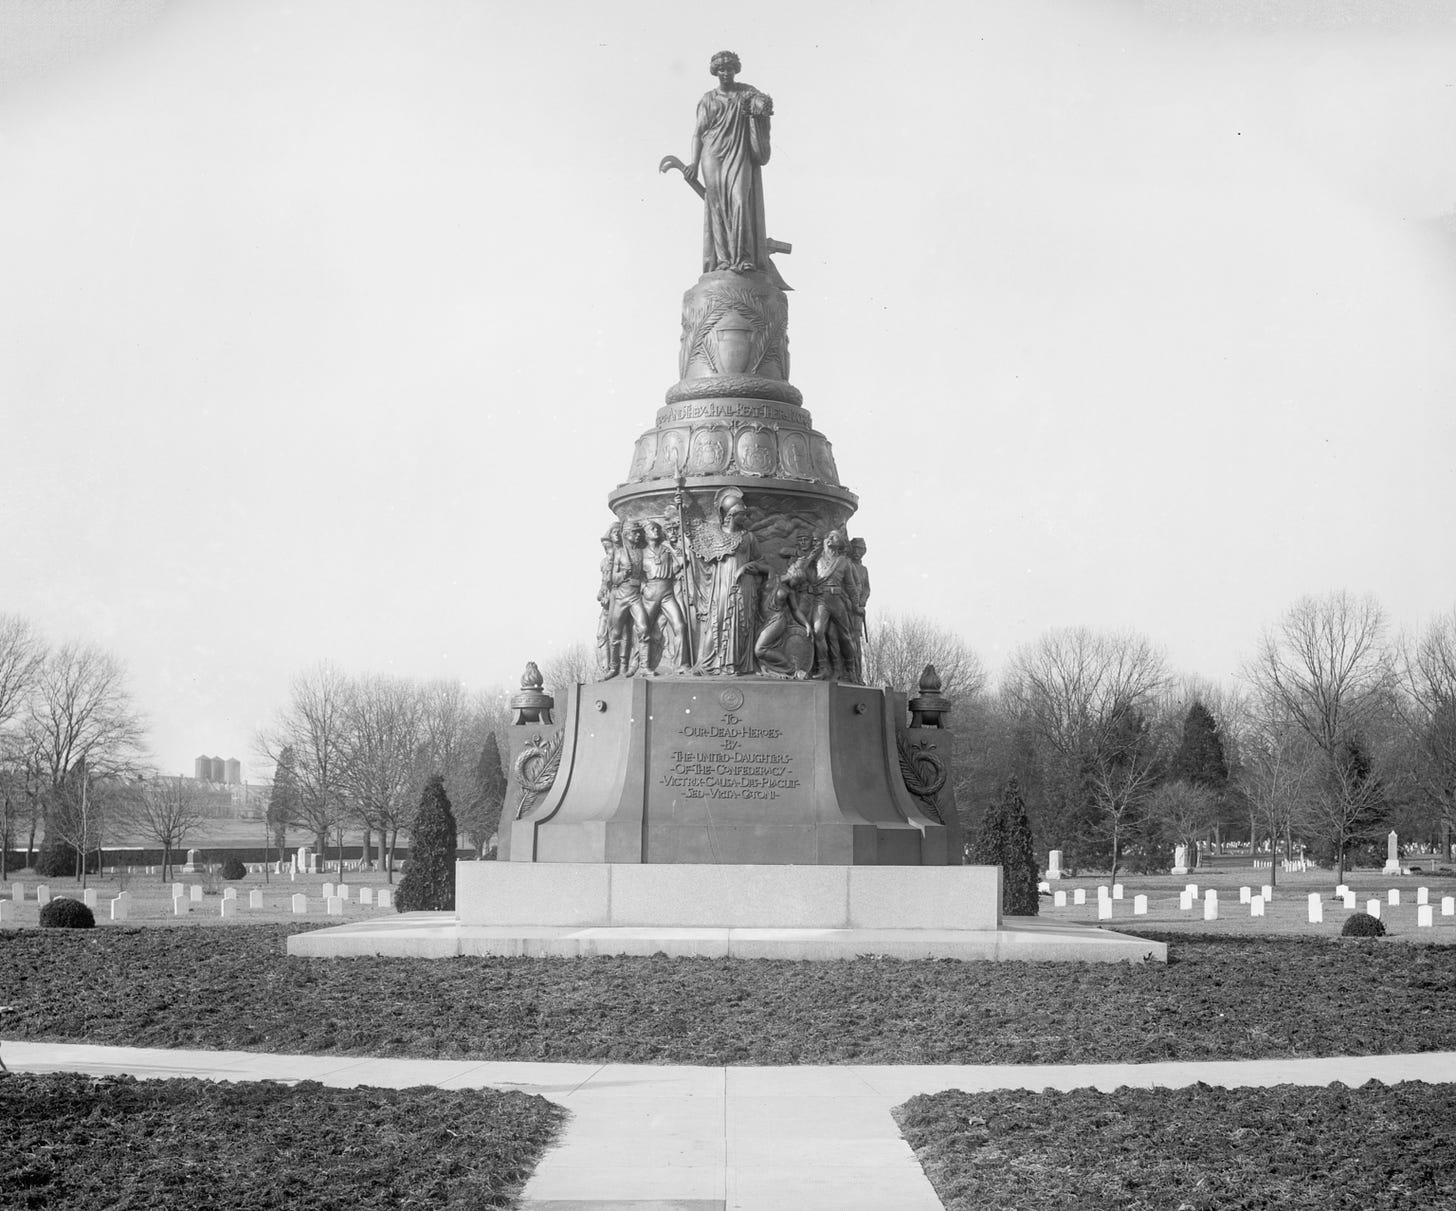 PHOTO: In this file photo, a Confederate Memorial is seen in Arlington National Cemetery between 1910 and 1925, in Arlington, Va.